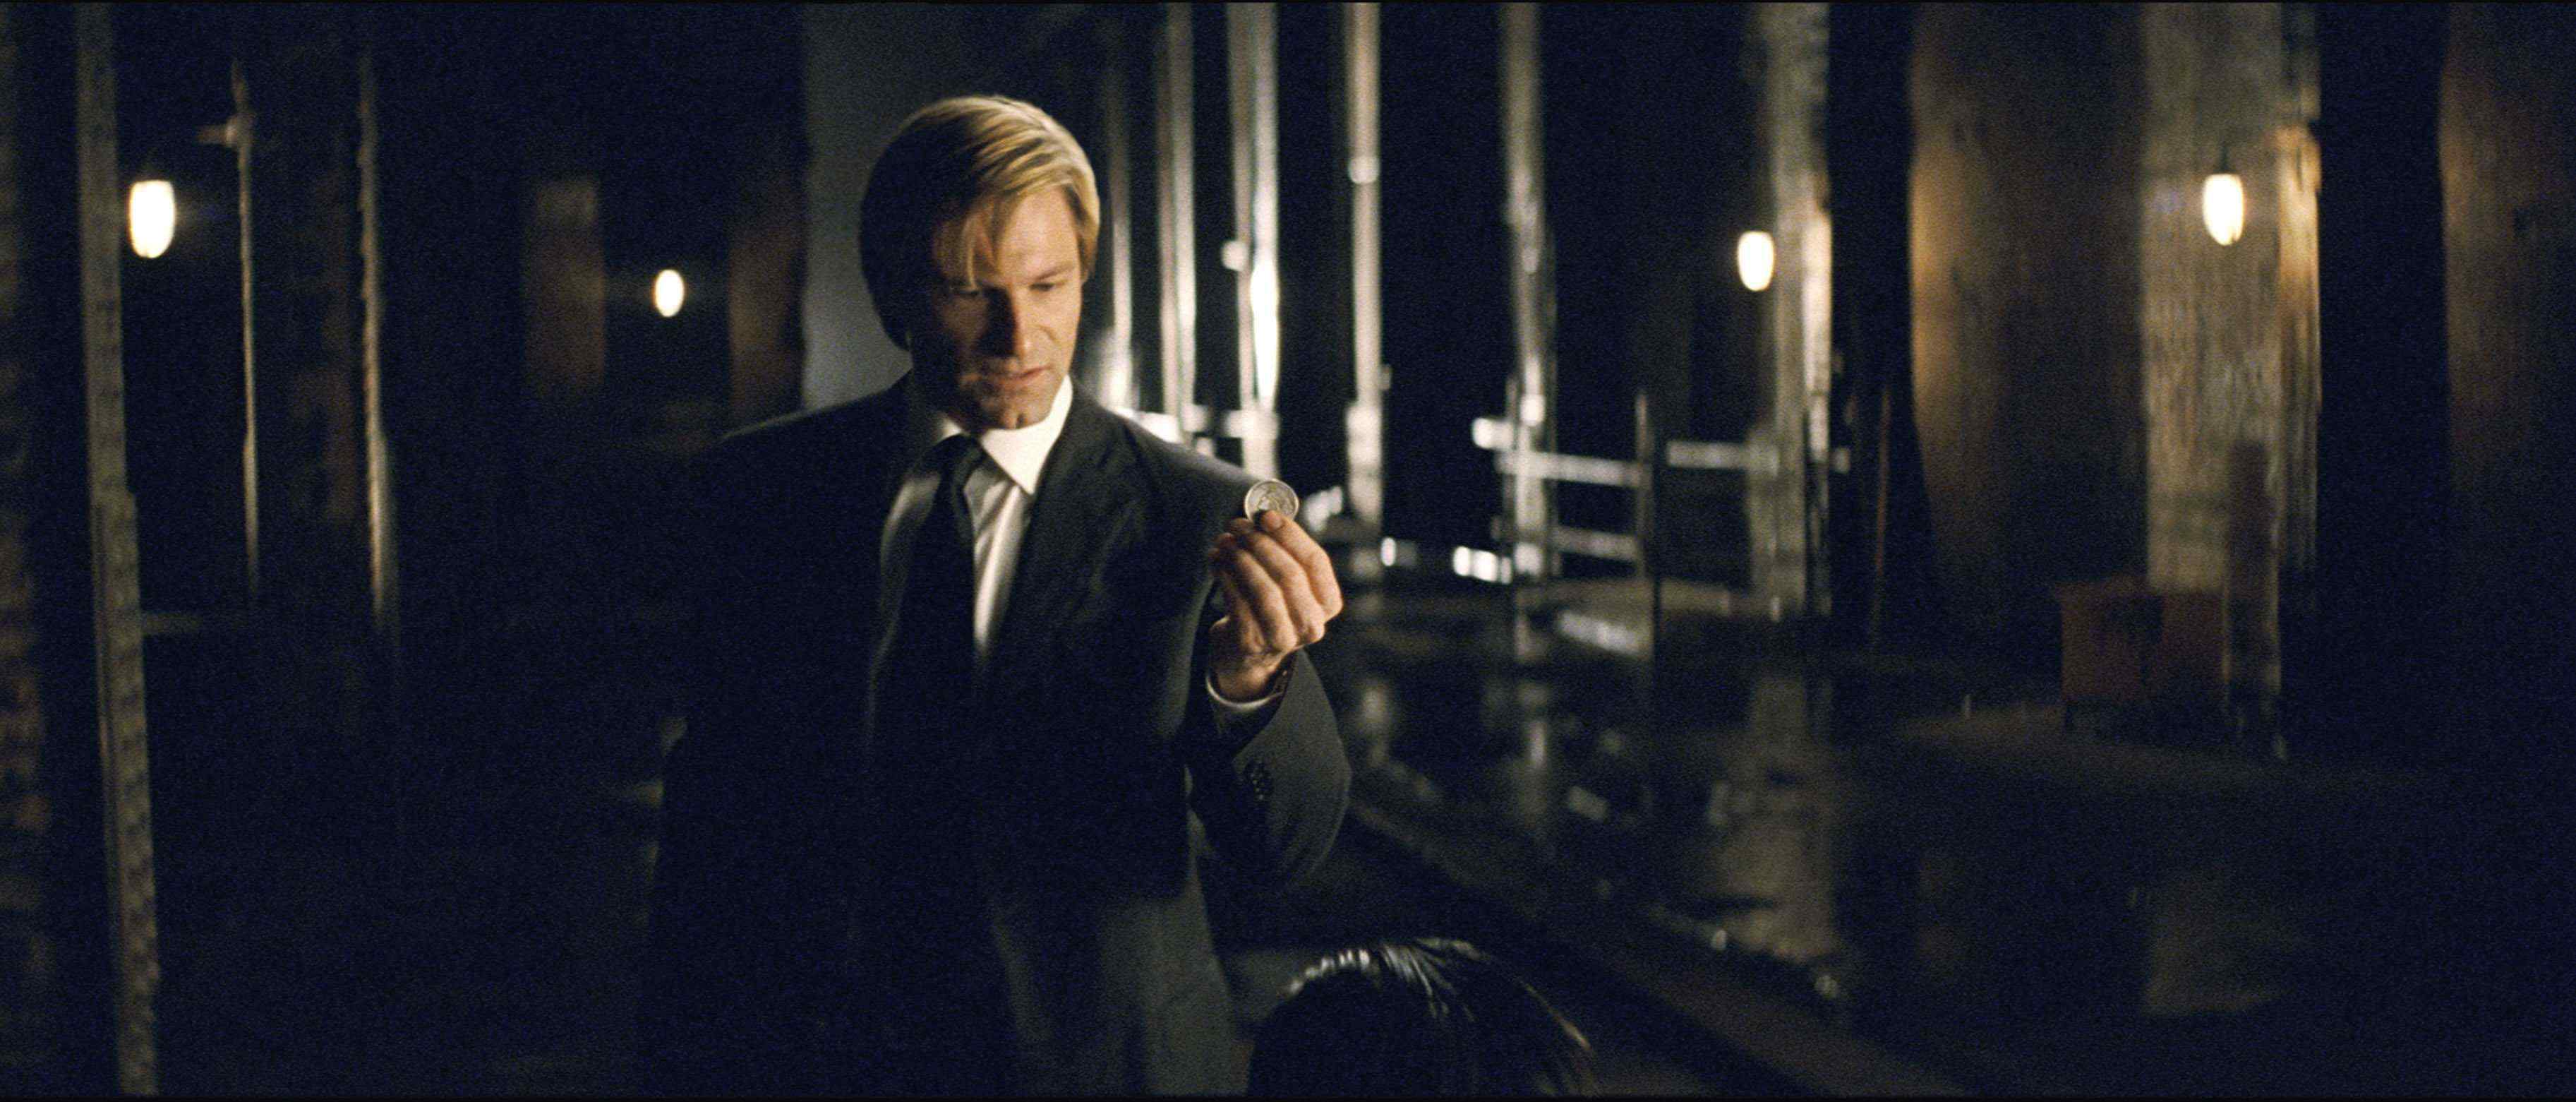 AARON ECKHART stars as Harvey Dent in Warner Bros. Pictures' and Legendary Pictures' action drama 